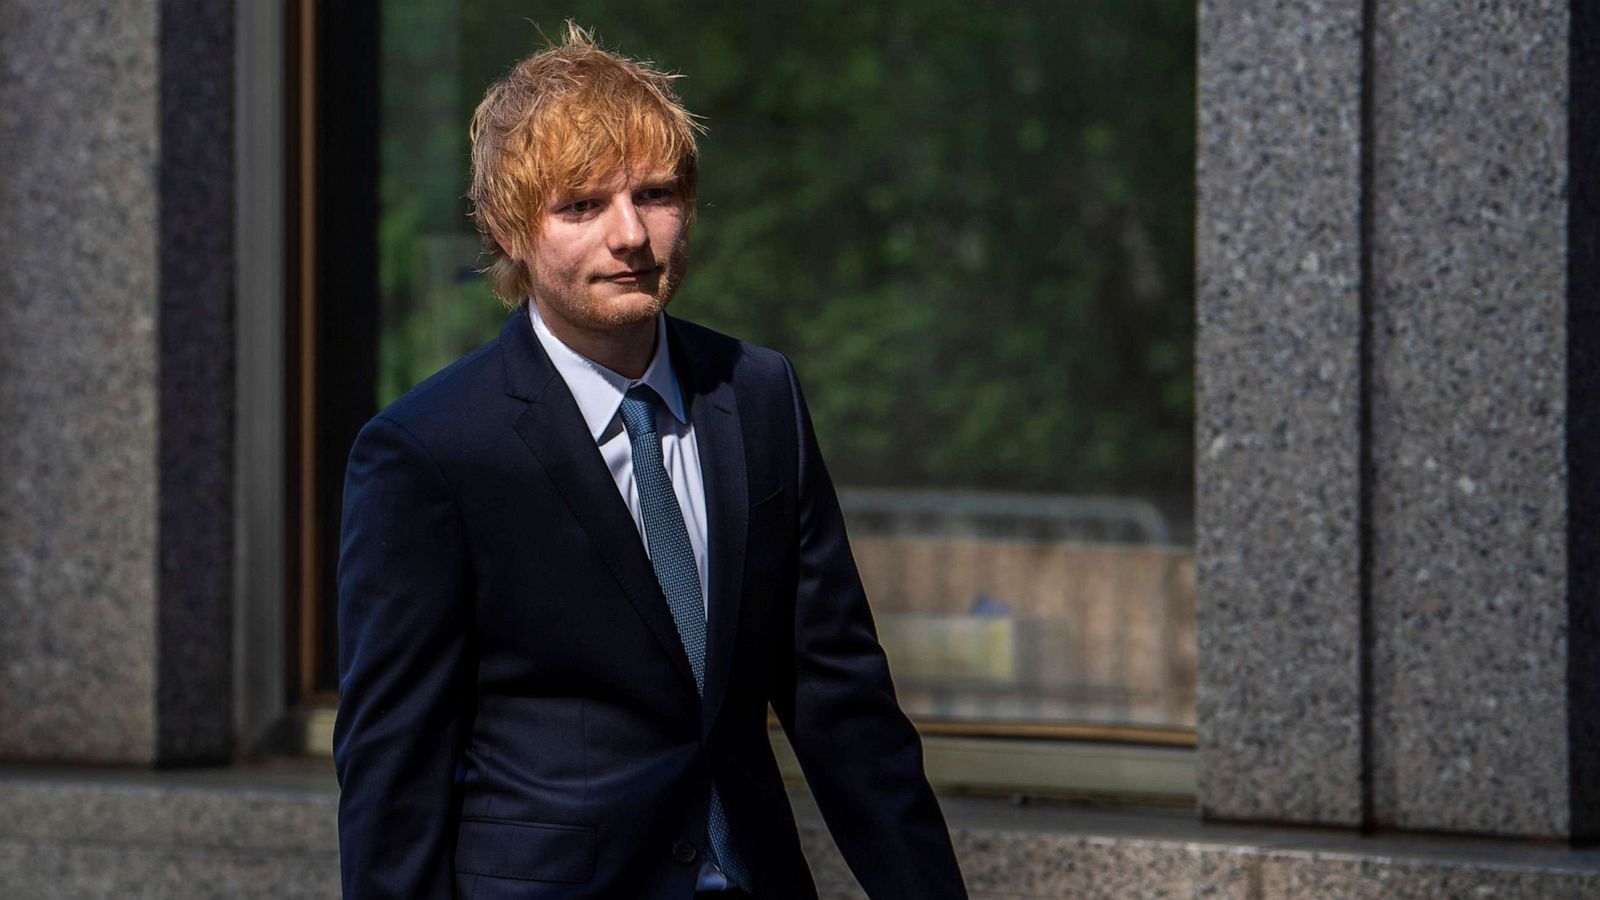 He was so emotional': the inside story of Ed Sheeran's new album – and his  US copyright trial, Ed Sheeran